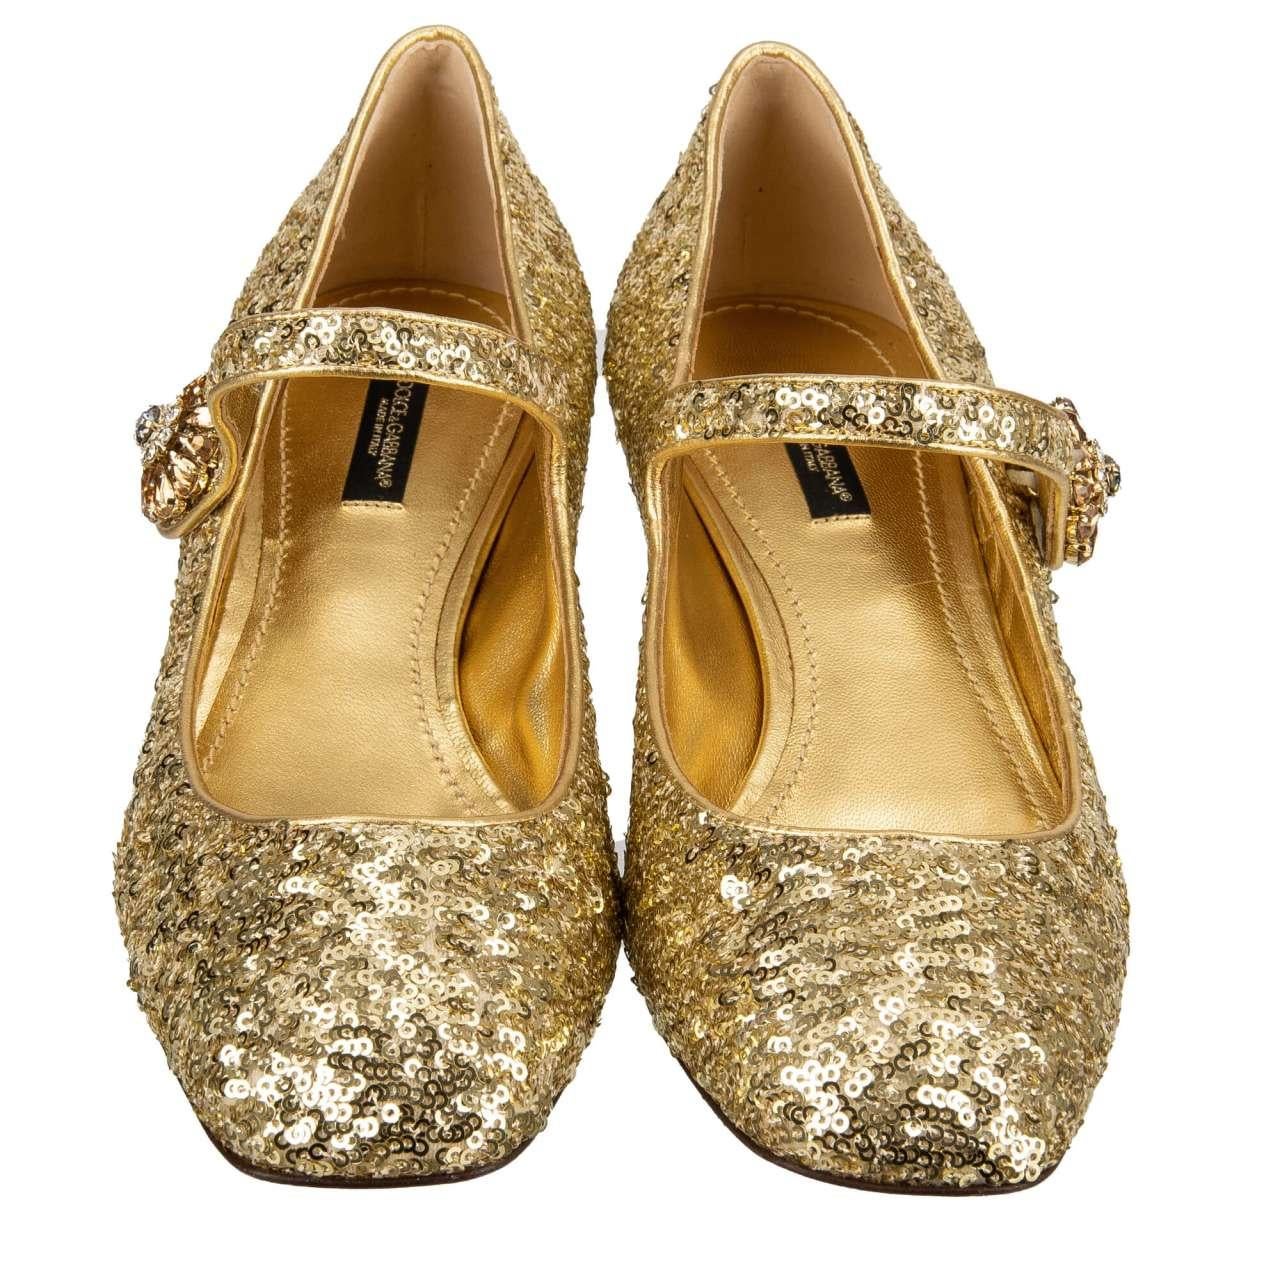 Dolce & Gabbana - Sequin Crystal Heels Mary Jane Pumps VALLY Gold 40 US 10 In Excellent Condition For Sale In Erkrath, DE